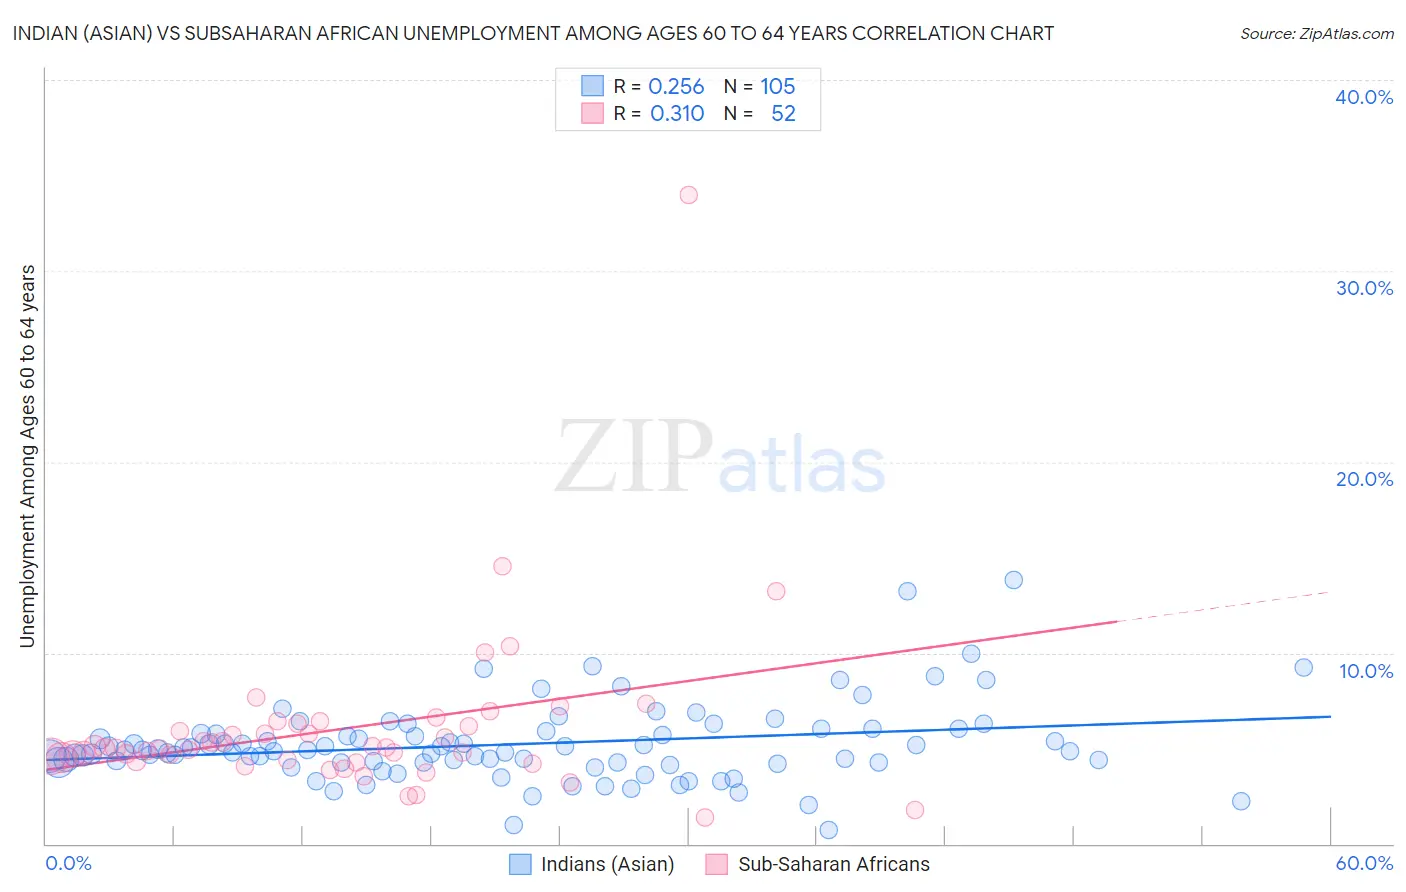 Indian (Asian) vs Subsaharan African Unemployment Among Ages 60 to 64 years